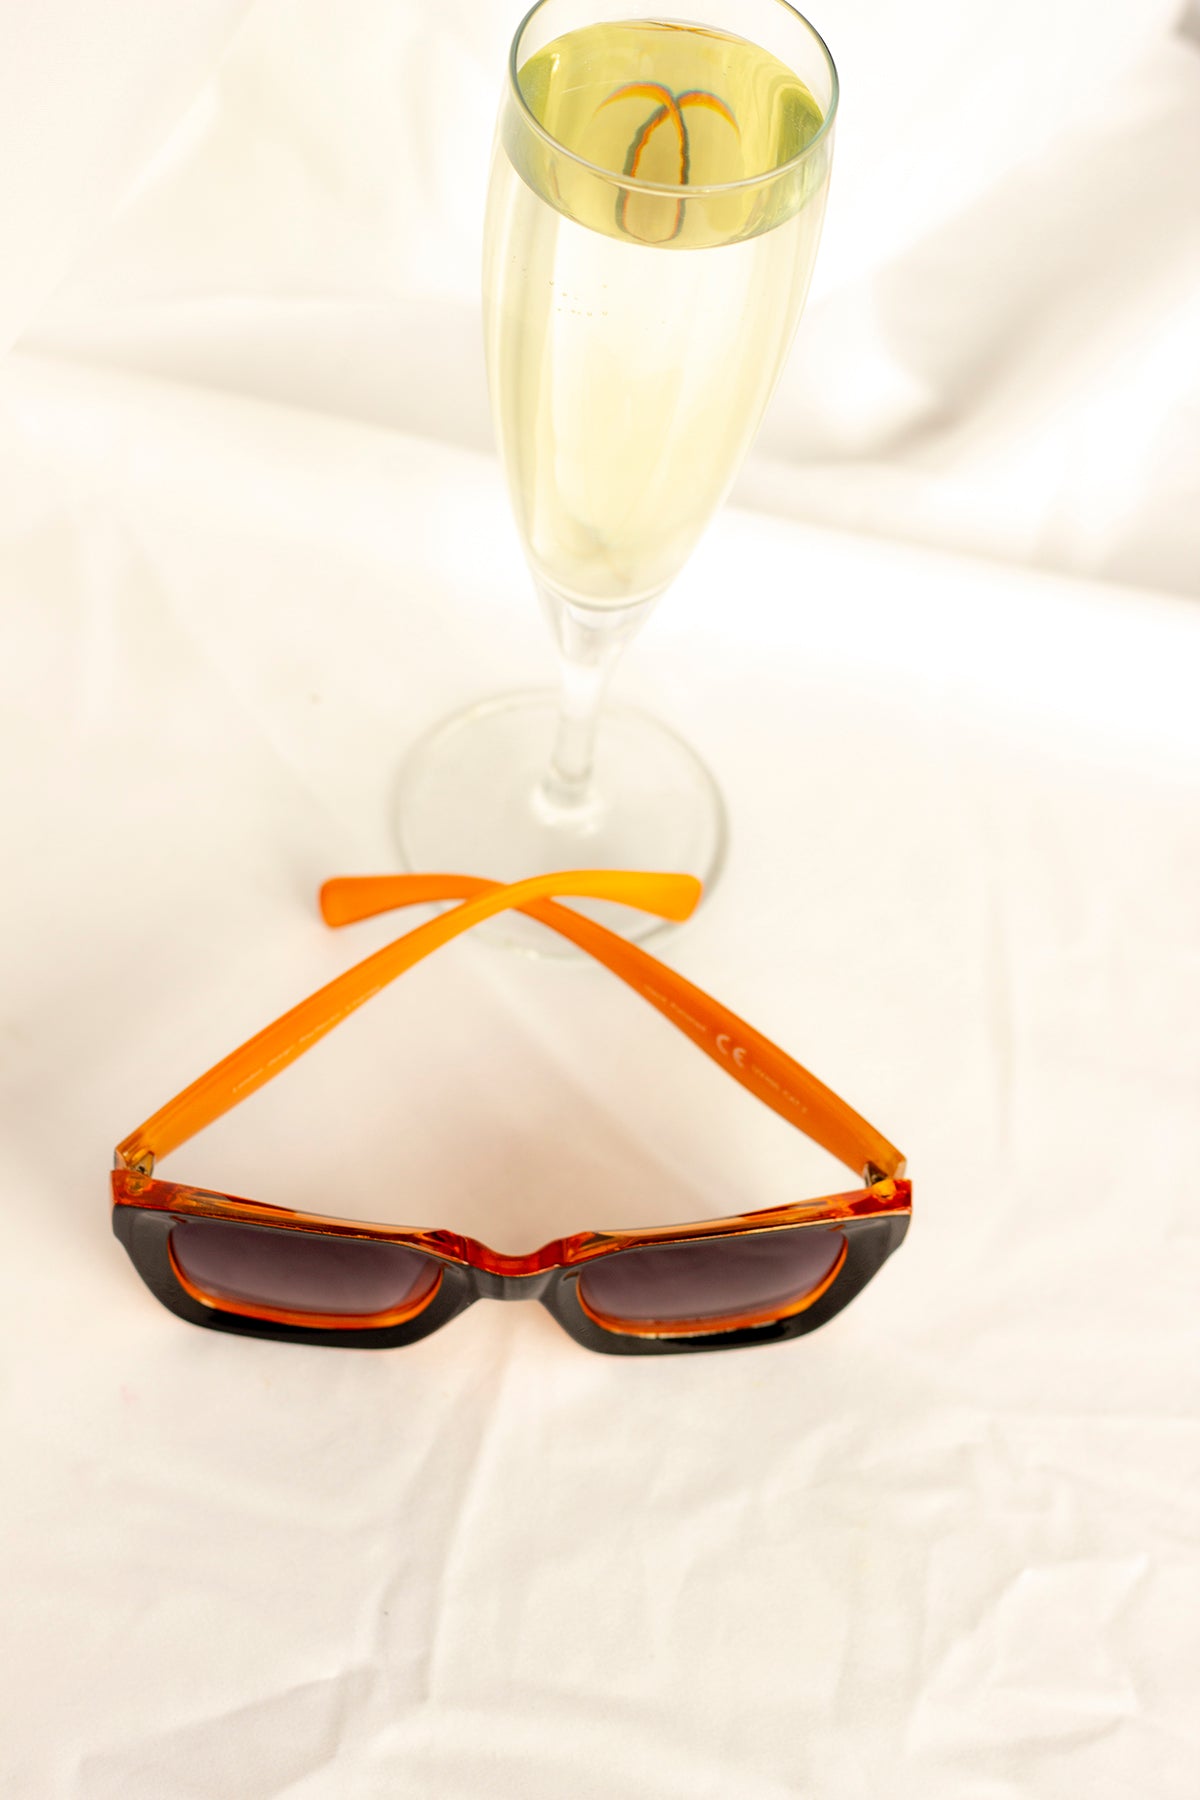 Chunky Bevelled Square Sunglasses - Sugar + Style